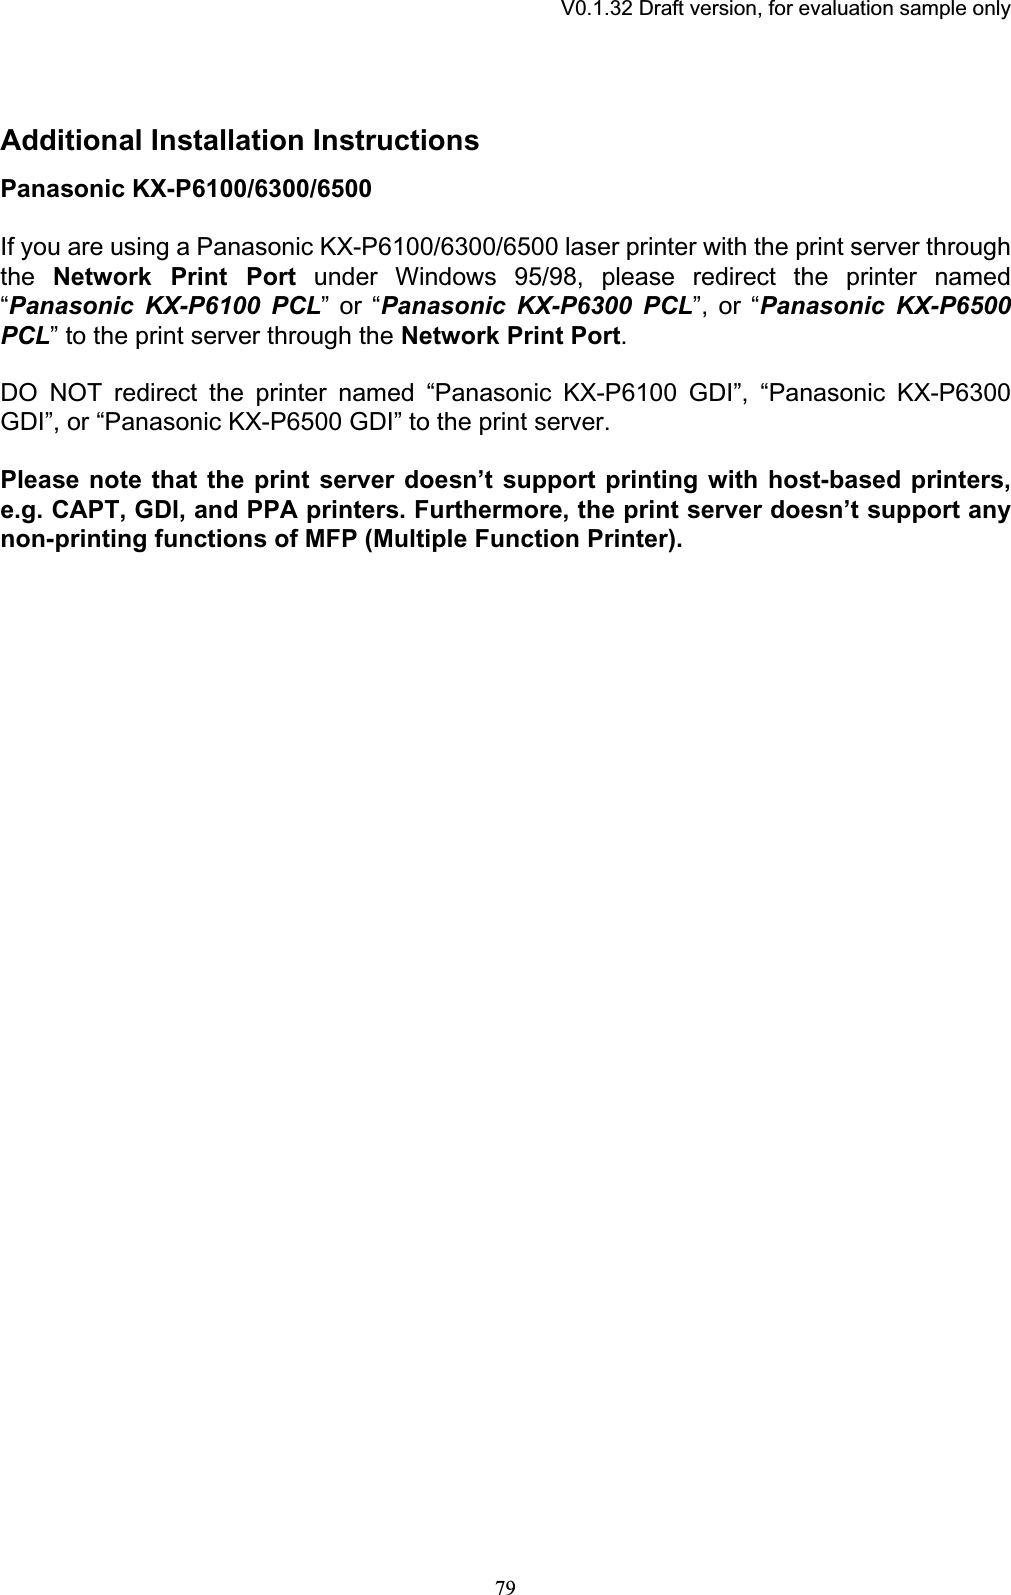 V0.1.32 Draft version, for evaluation sample onlyAdditional Installation InstructionsPanasonic KX-P6100/6300/6500 If you are using a Panasonic KX-P6100/6300/6500 laser printer with the print server through the Network Print Port under Windows 95/98, please redirect the printer named “Panasonic KX-P6100 PCL” or “Panasonic KX-P6300 PCL”, or “Panasonic KX-P6500 PCL” to the print server through the Network Print Port.DO NOT redirect the printer named “Panasonic KX-P6100 GDI”, “Panasonic KX-P6300 GDI”, or “Panasonic KX-P6500 GDI” to the print server. Please note that the print server doesn’t support printing with host-based printers, e.g. CAPT, GDI, and PPA printers. Furthermore, the print server doesn’t support anynon-printing functions of MFP (Multiple Function Printer).79